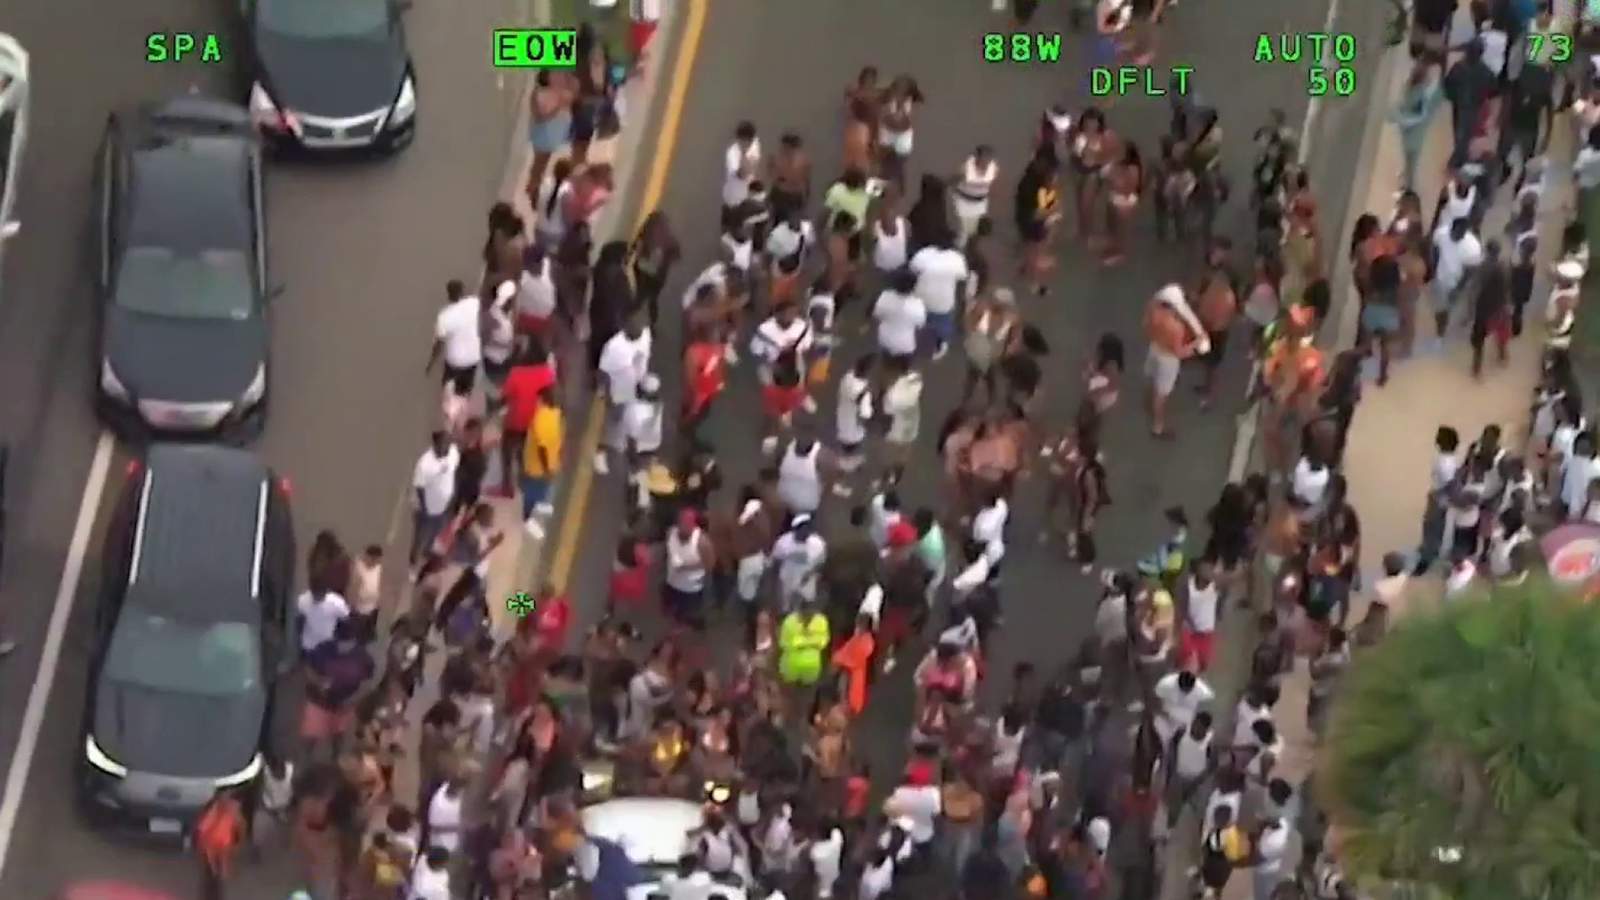 Video: Massive crowds gather in Daytona Beach; residents fear for their safety